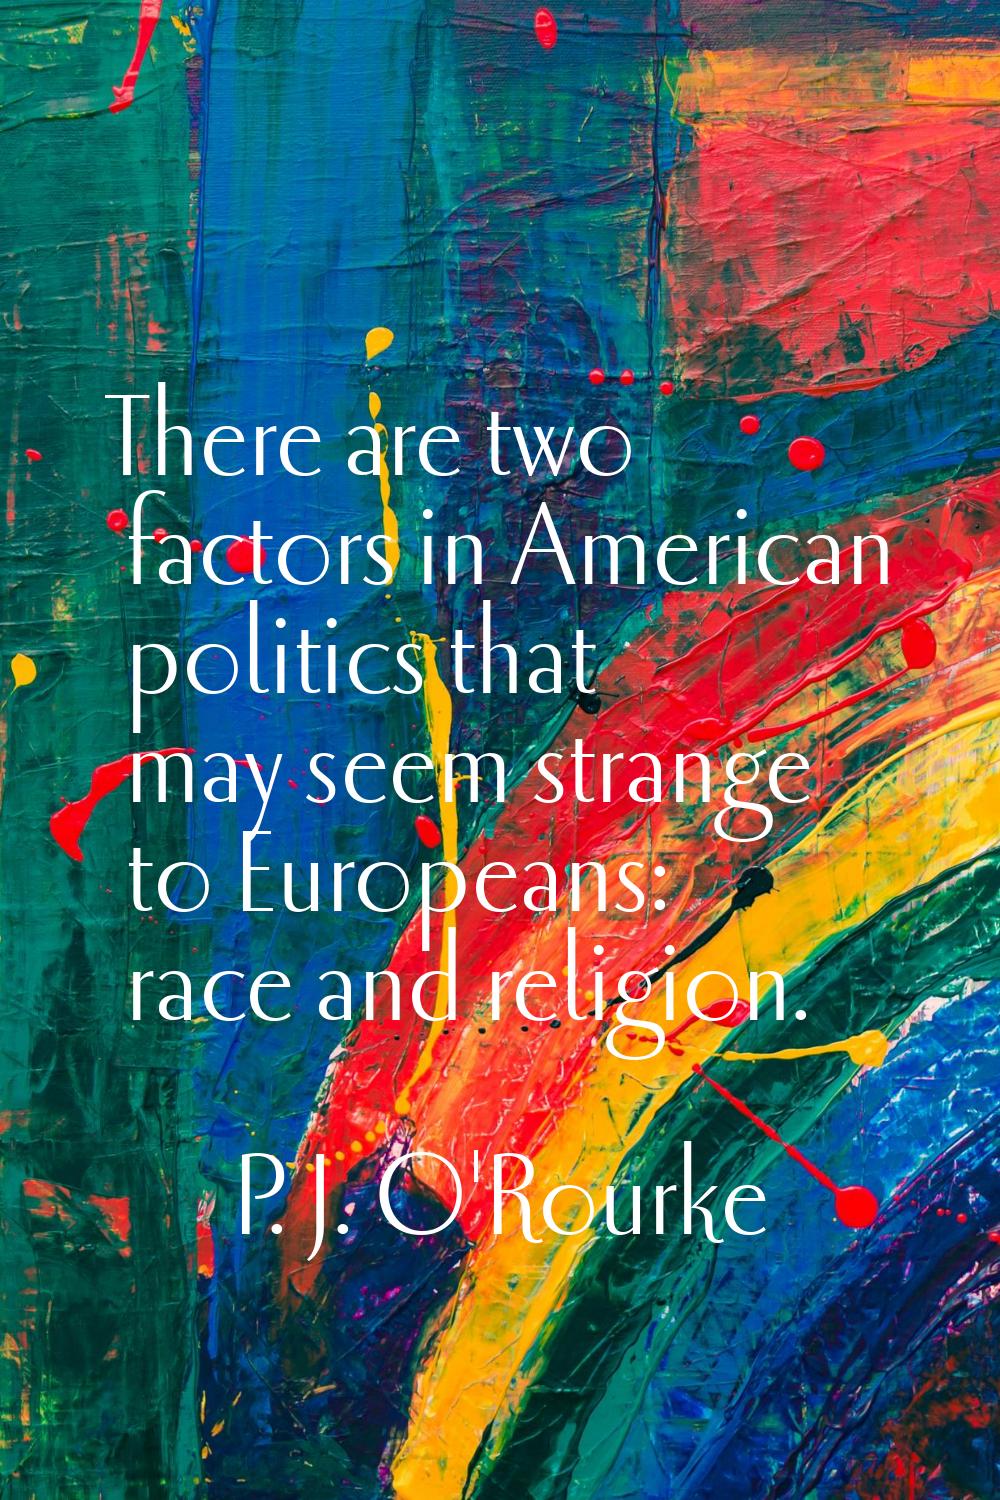 There are two factors in American politics that may seem strange to Europeans: race and religion.